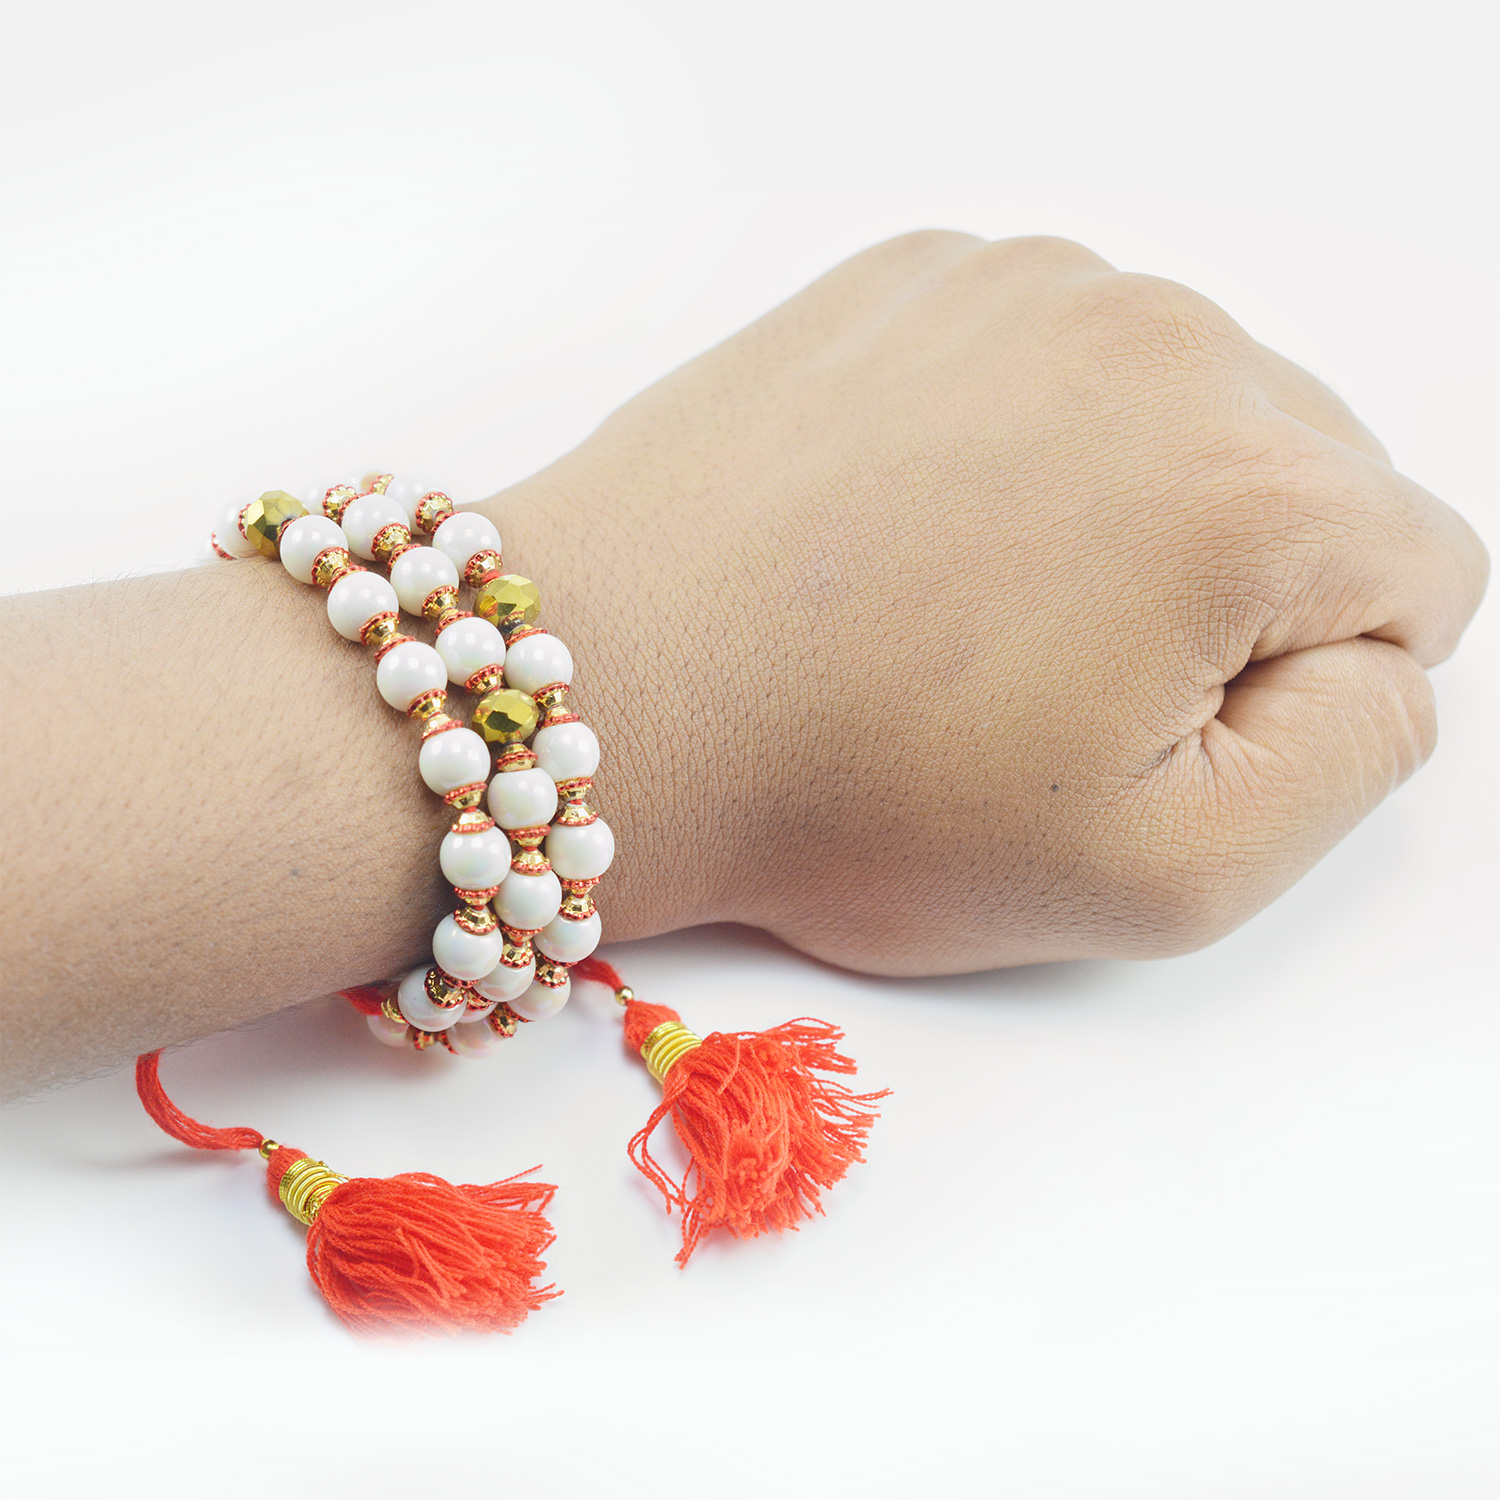 White and Golden Beaded Amazing Looking Rounded Rakhi Bracelet for Brother